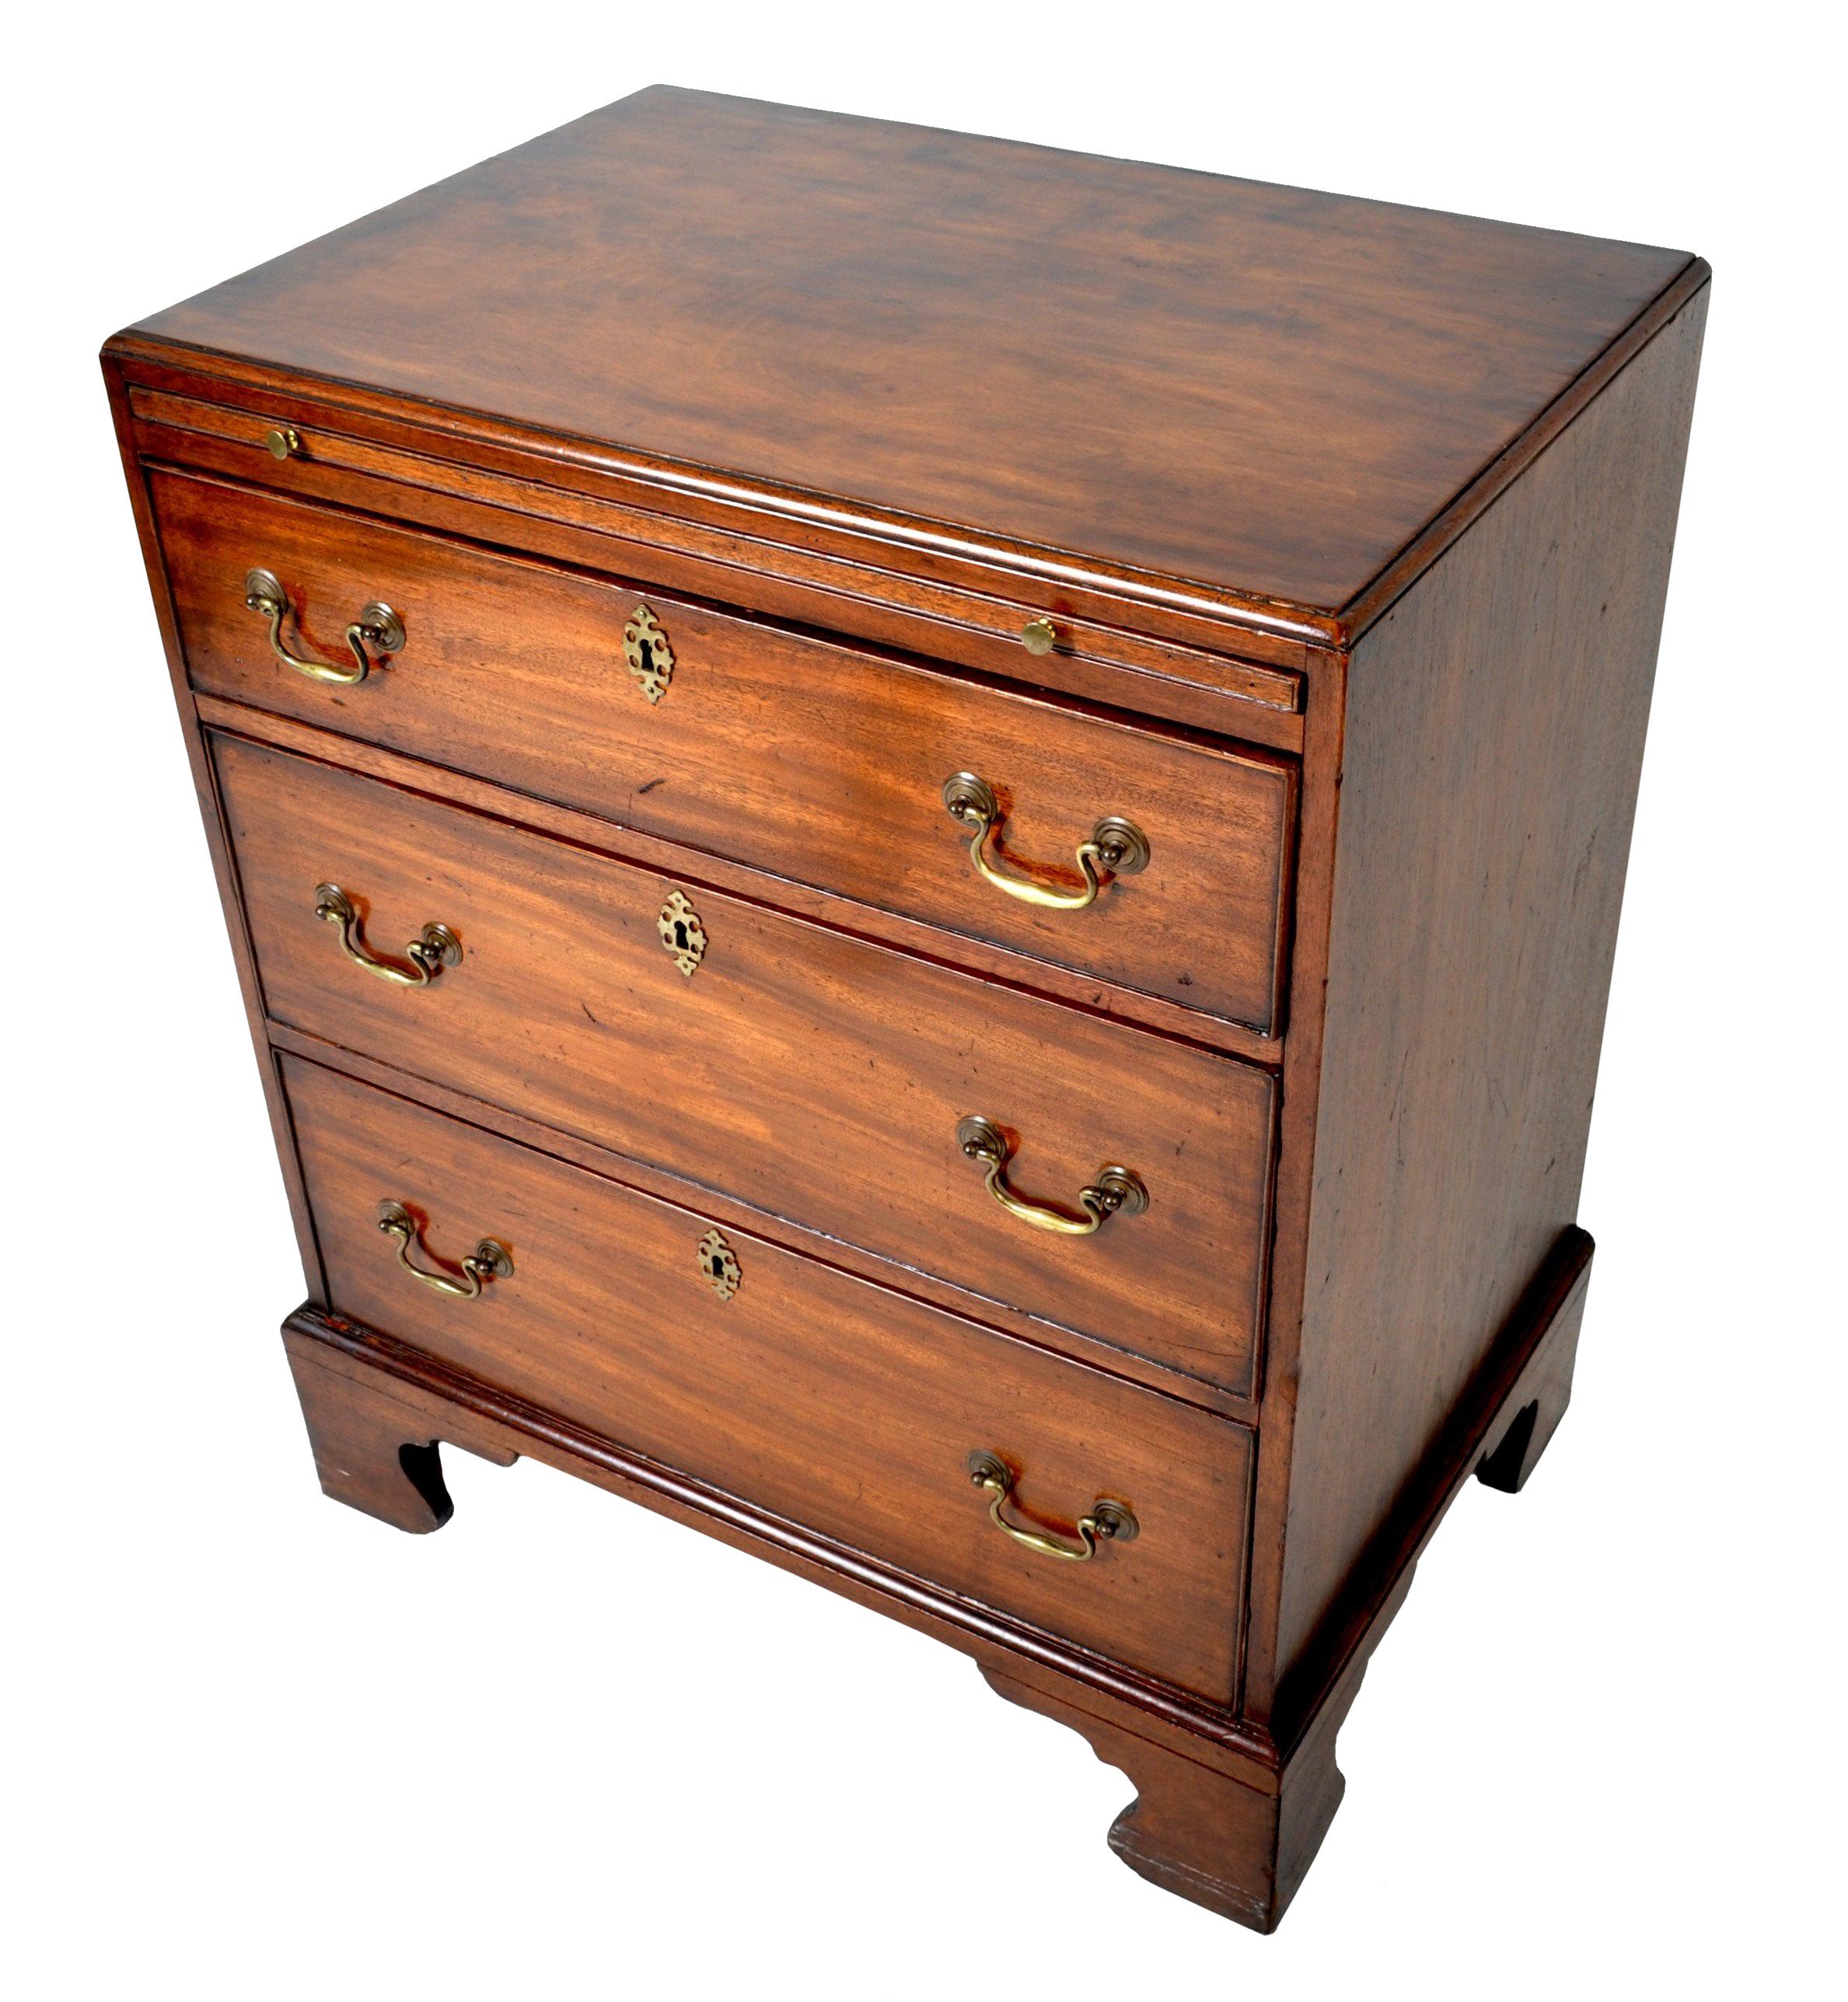 Antique gentleman's 'Bachelor's' Georgian chest of drawers, circa 1760. Made of solid Cuban mahogany, the chest of unusual diminutive size and having a brushing slide to the top with three graduated drawers below. The chest standing on shaped